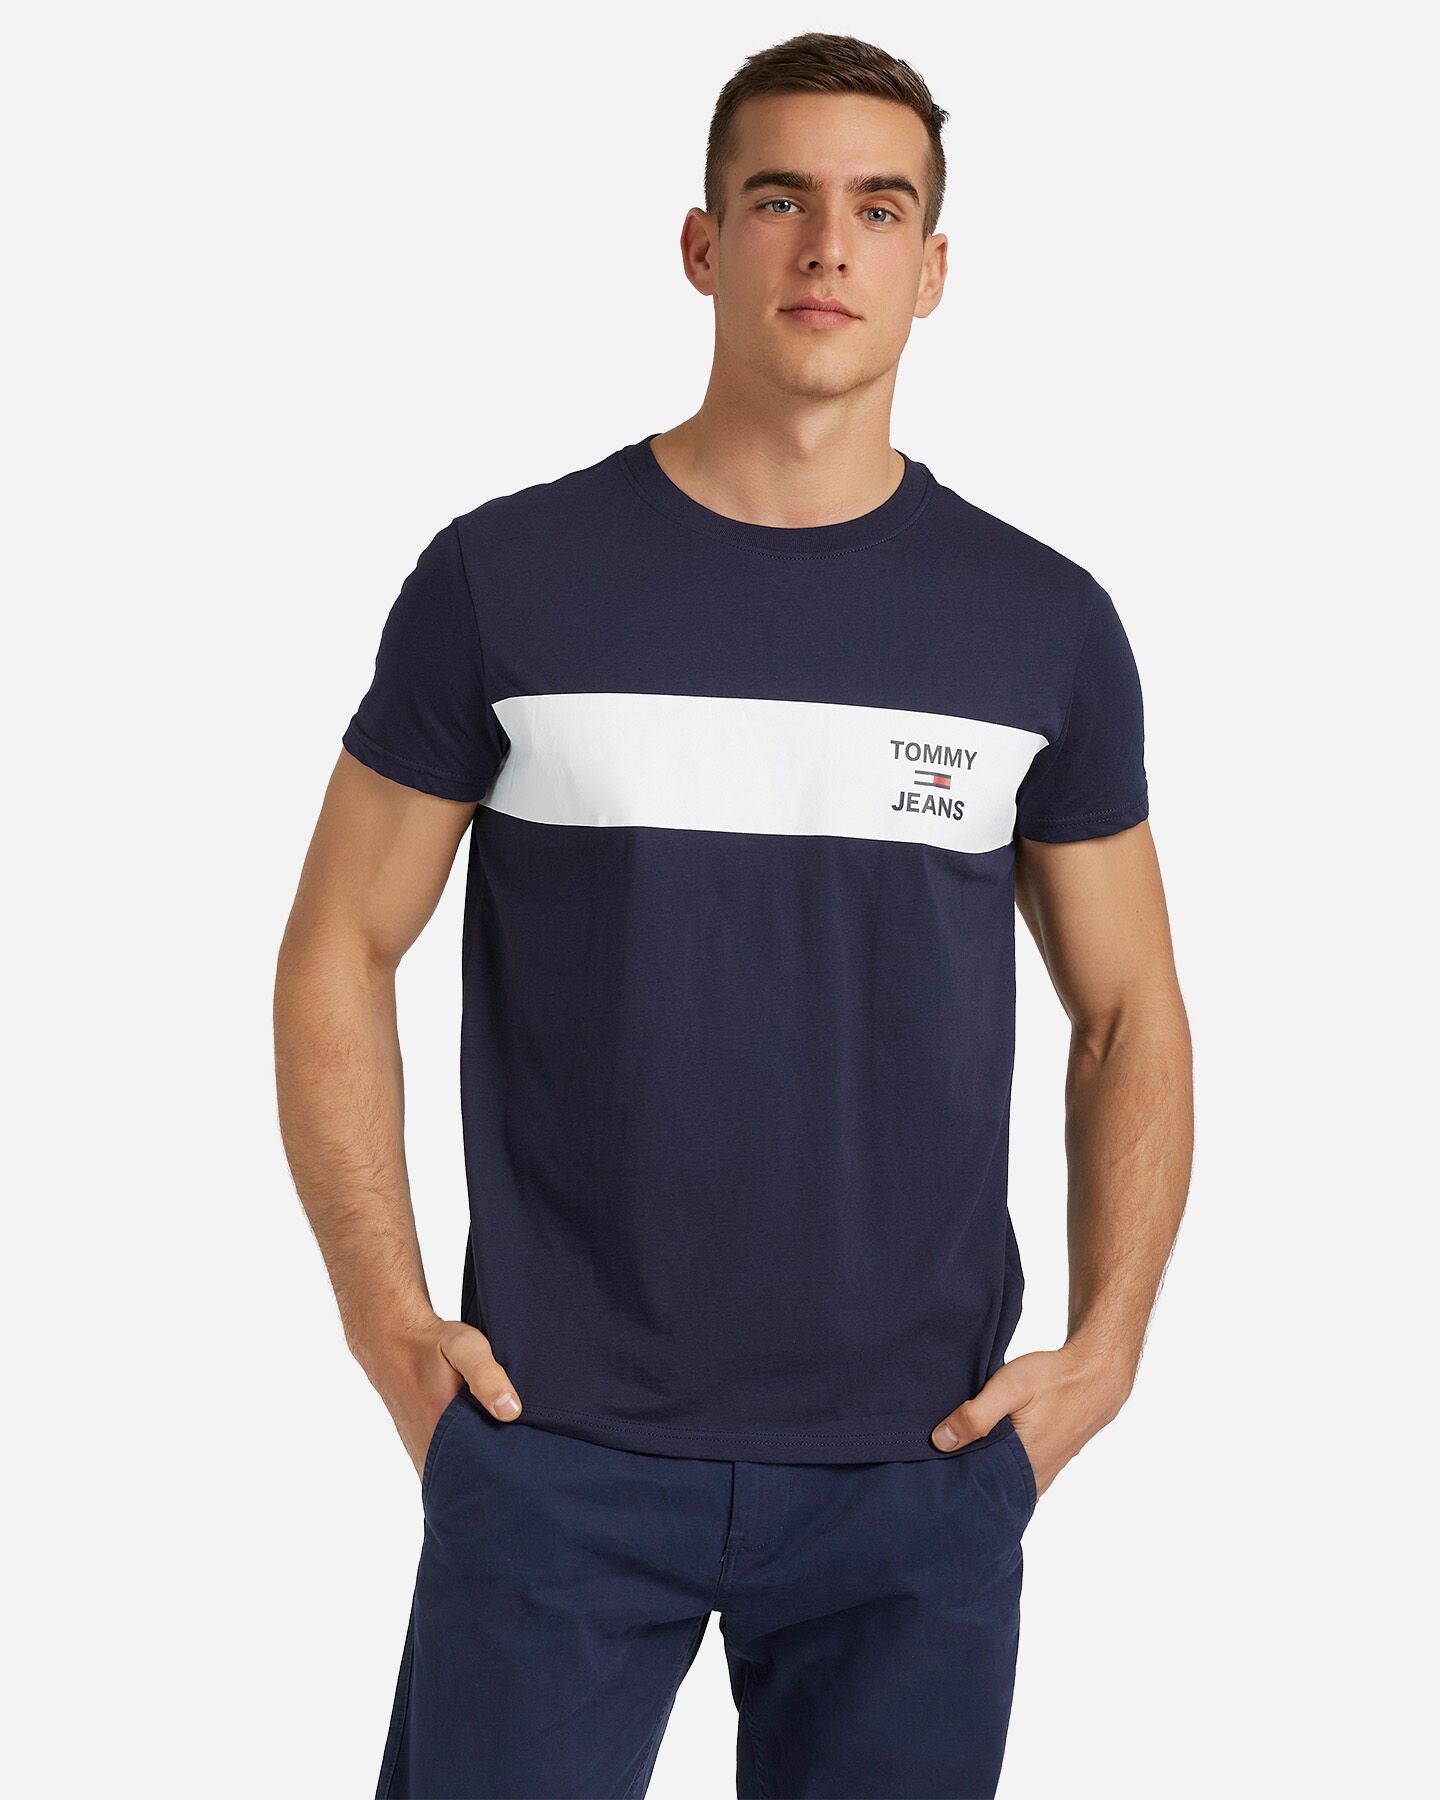  T-Shirt TOMMY HILFIGER CHEST M S4076853|C87|S scatto 0